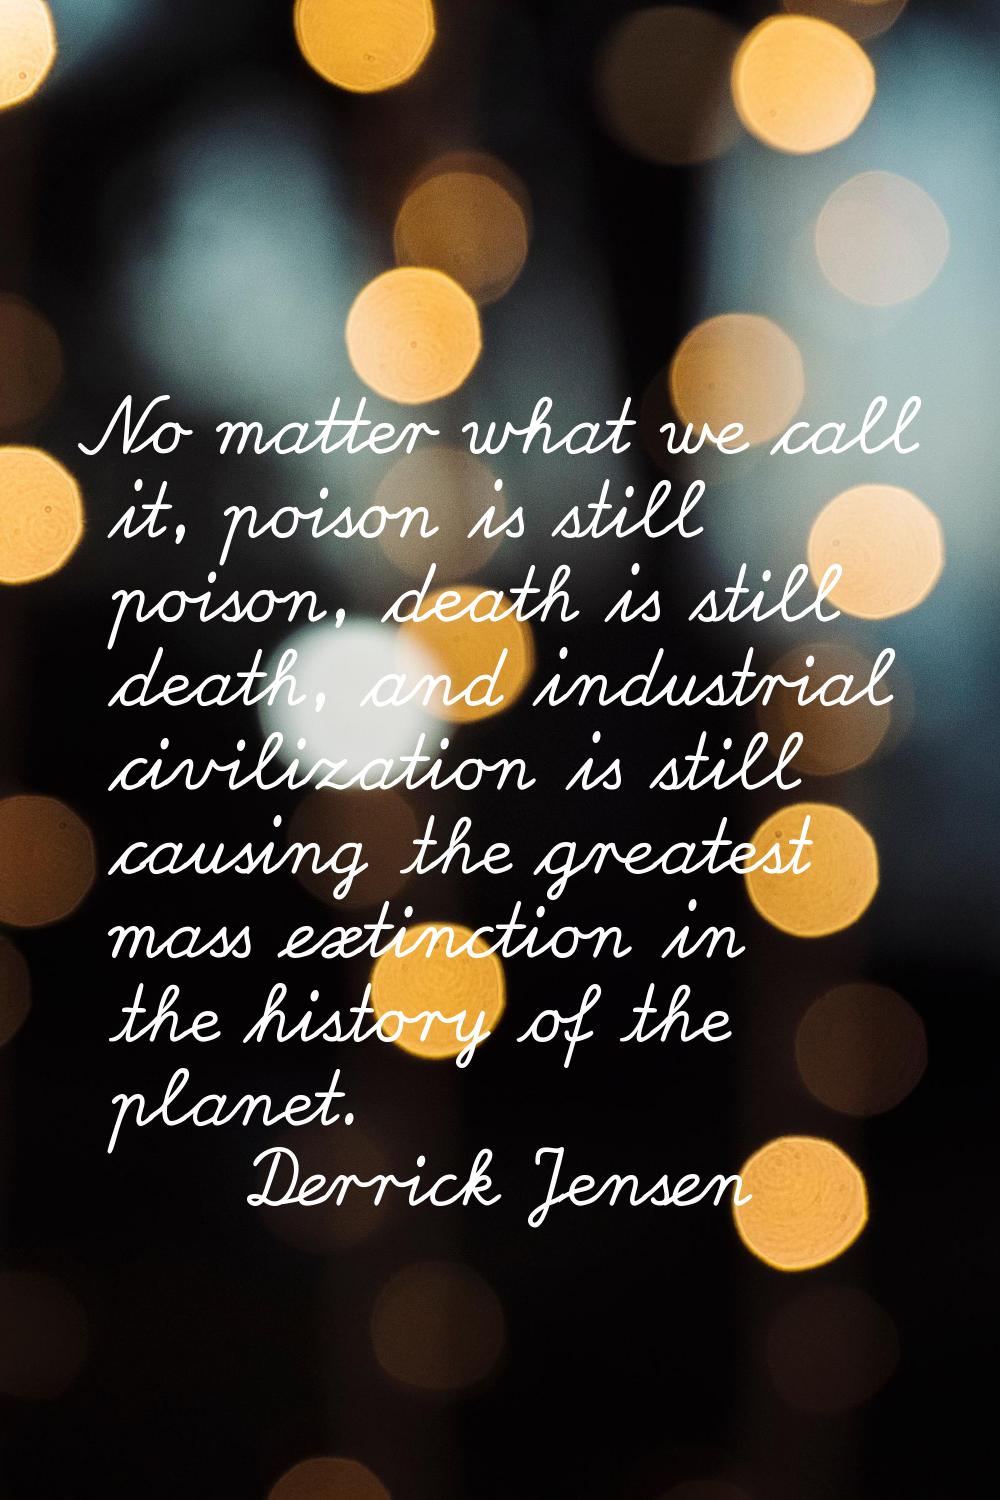 No matter what we call it, poison is still poison, death is still death, and industrial civilizatio